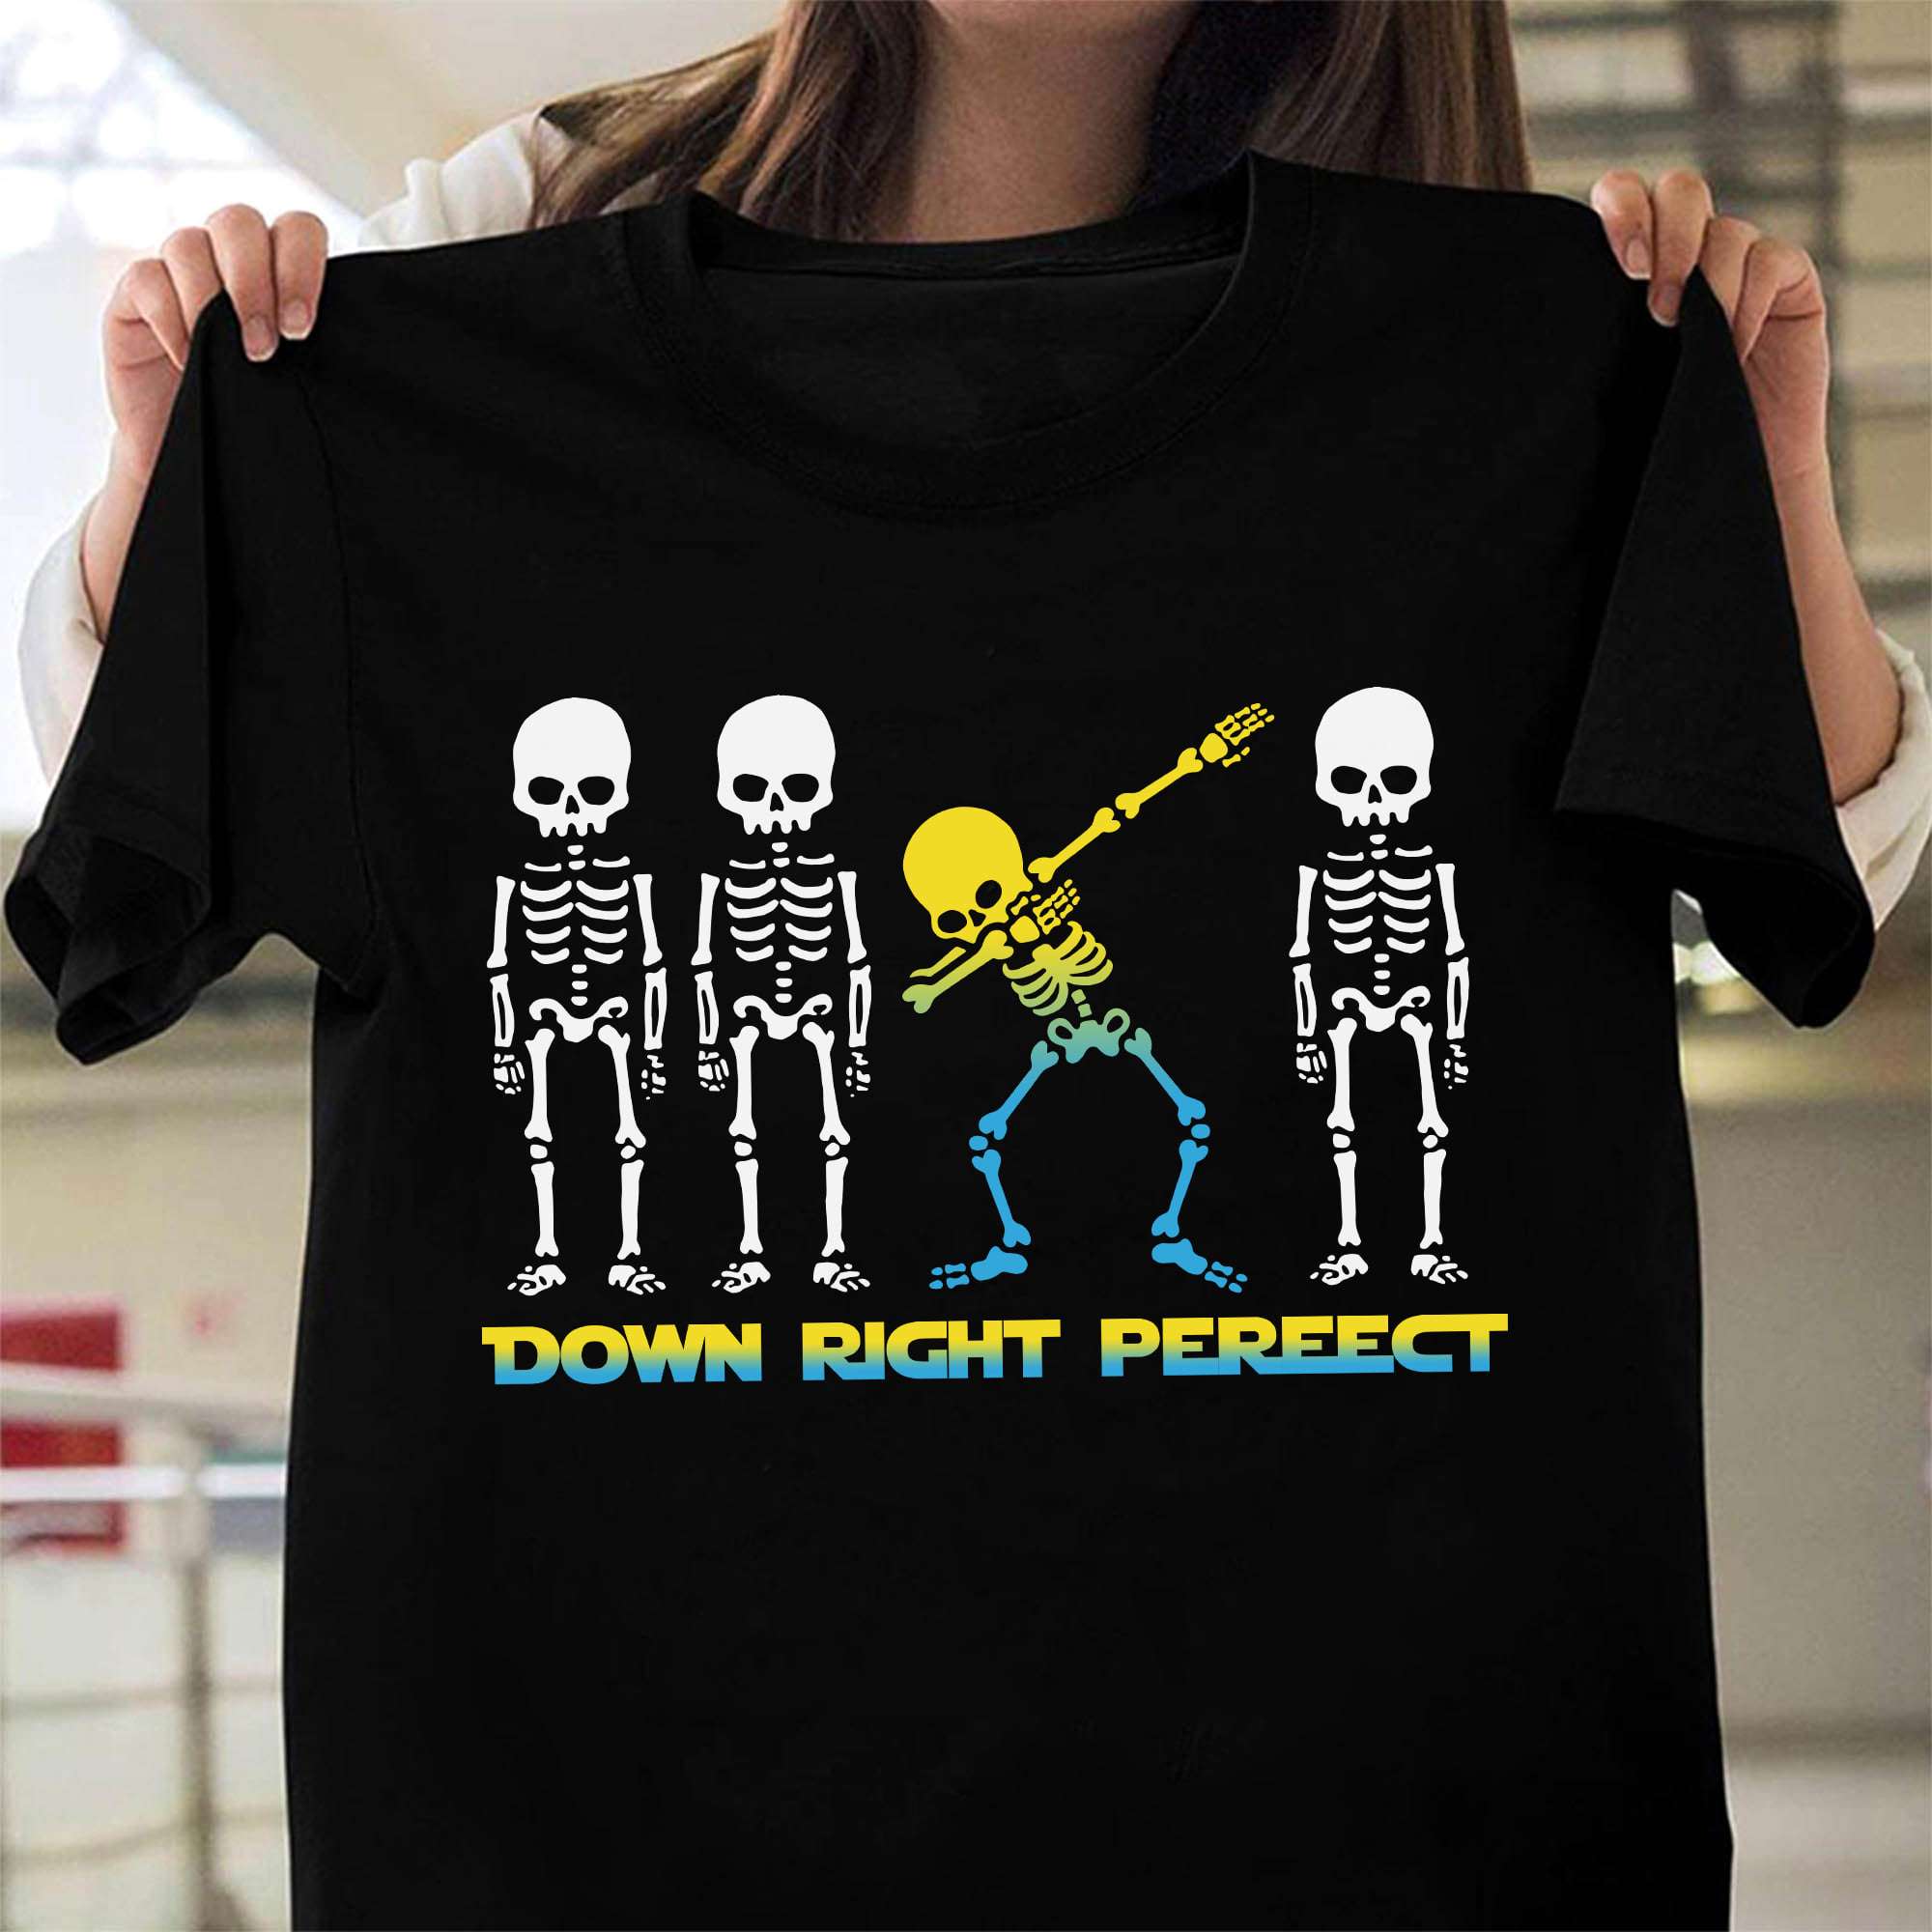 Down right perfect - DAB skull, be different